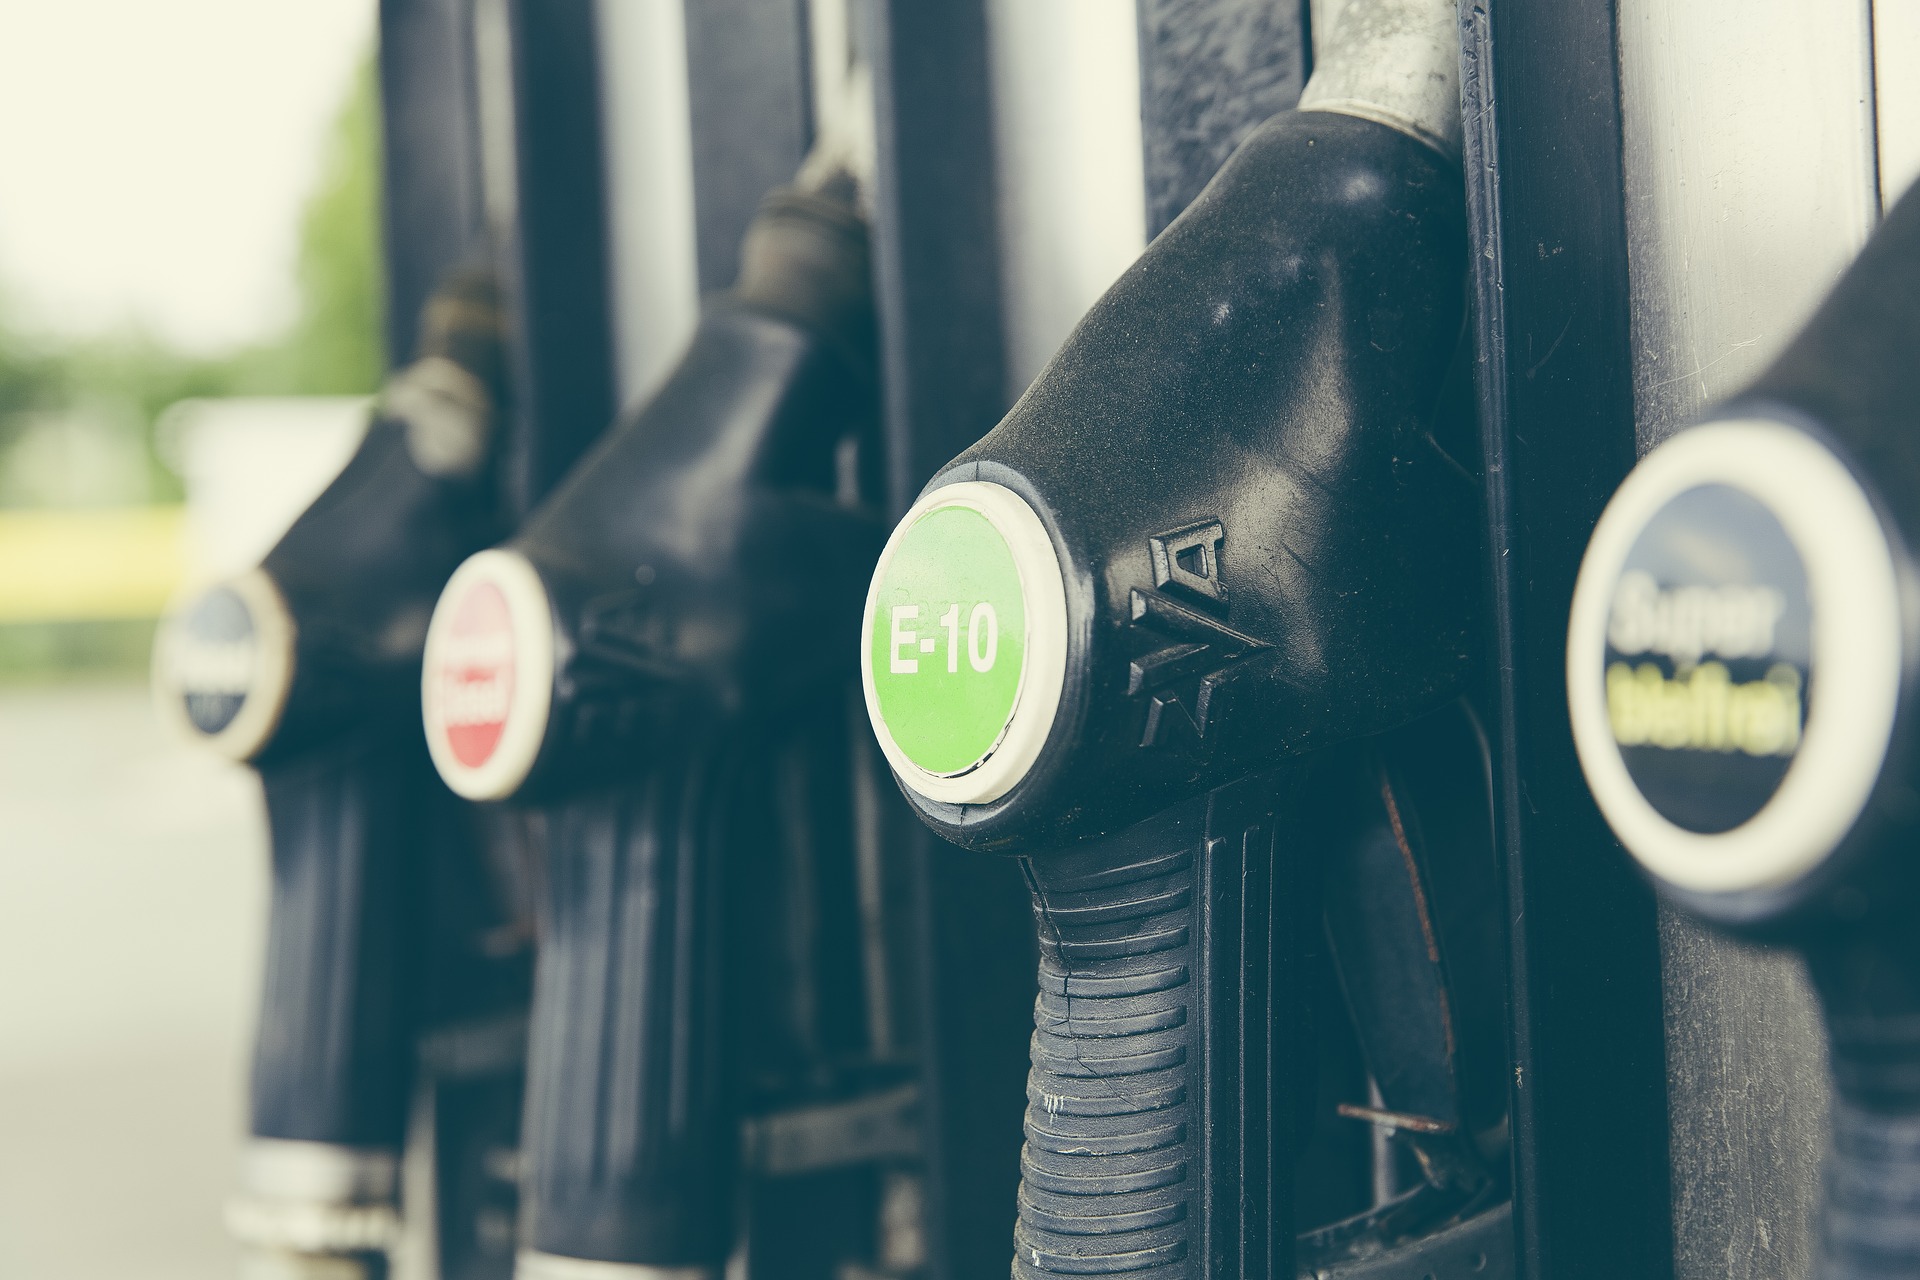 The Government Acknowledges the Voluntary Fuel Price Reduction